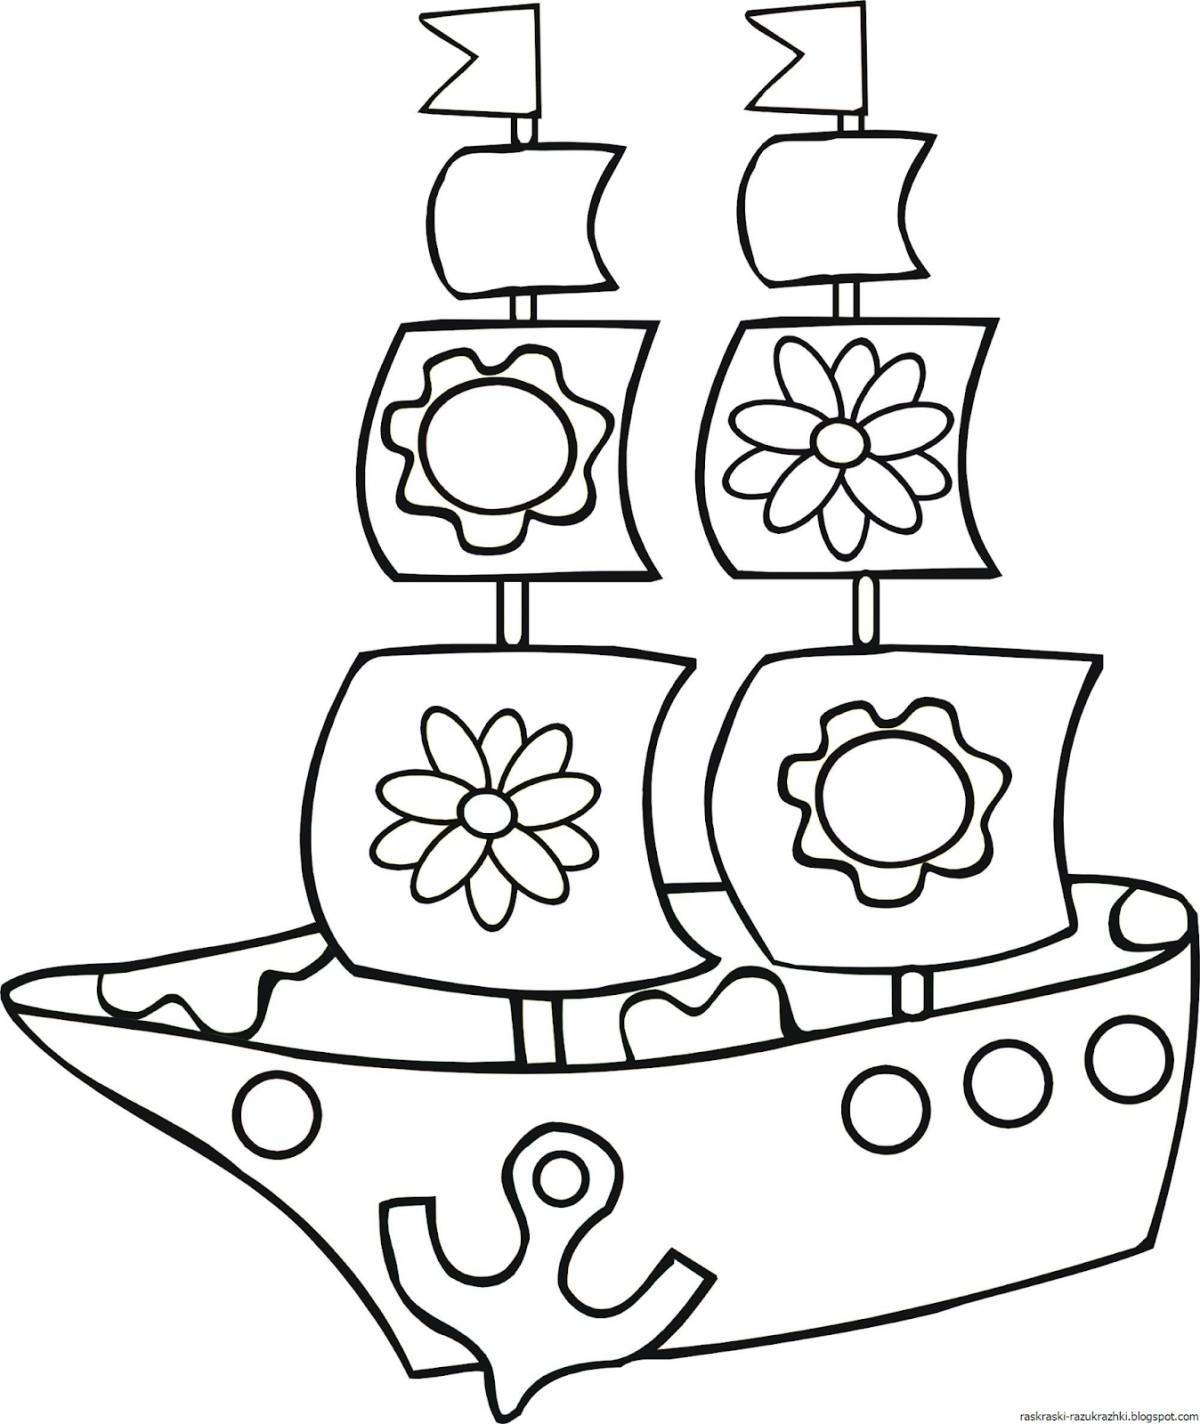 Color ship coloring book for kids